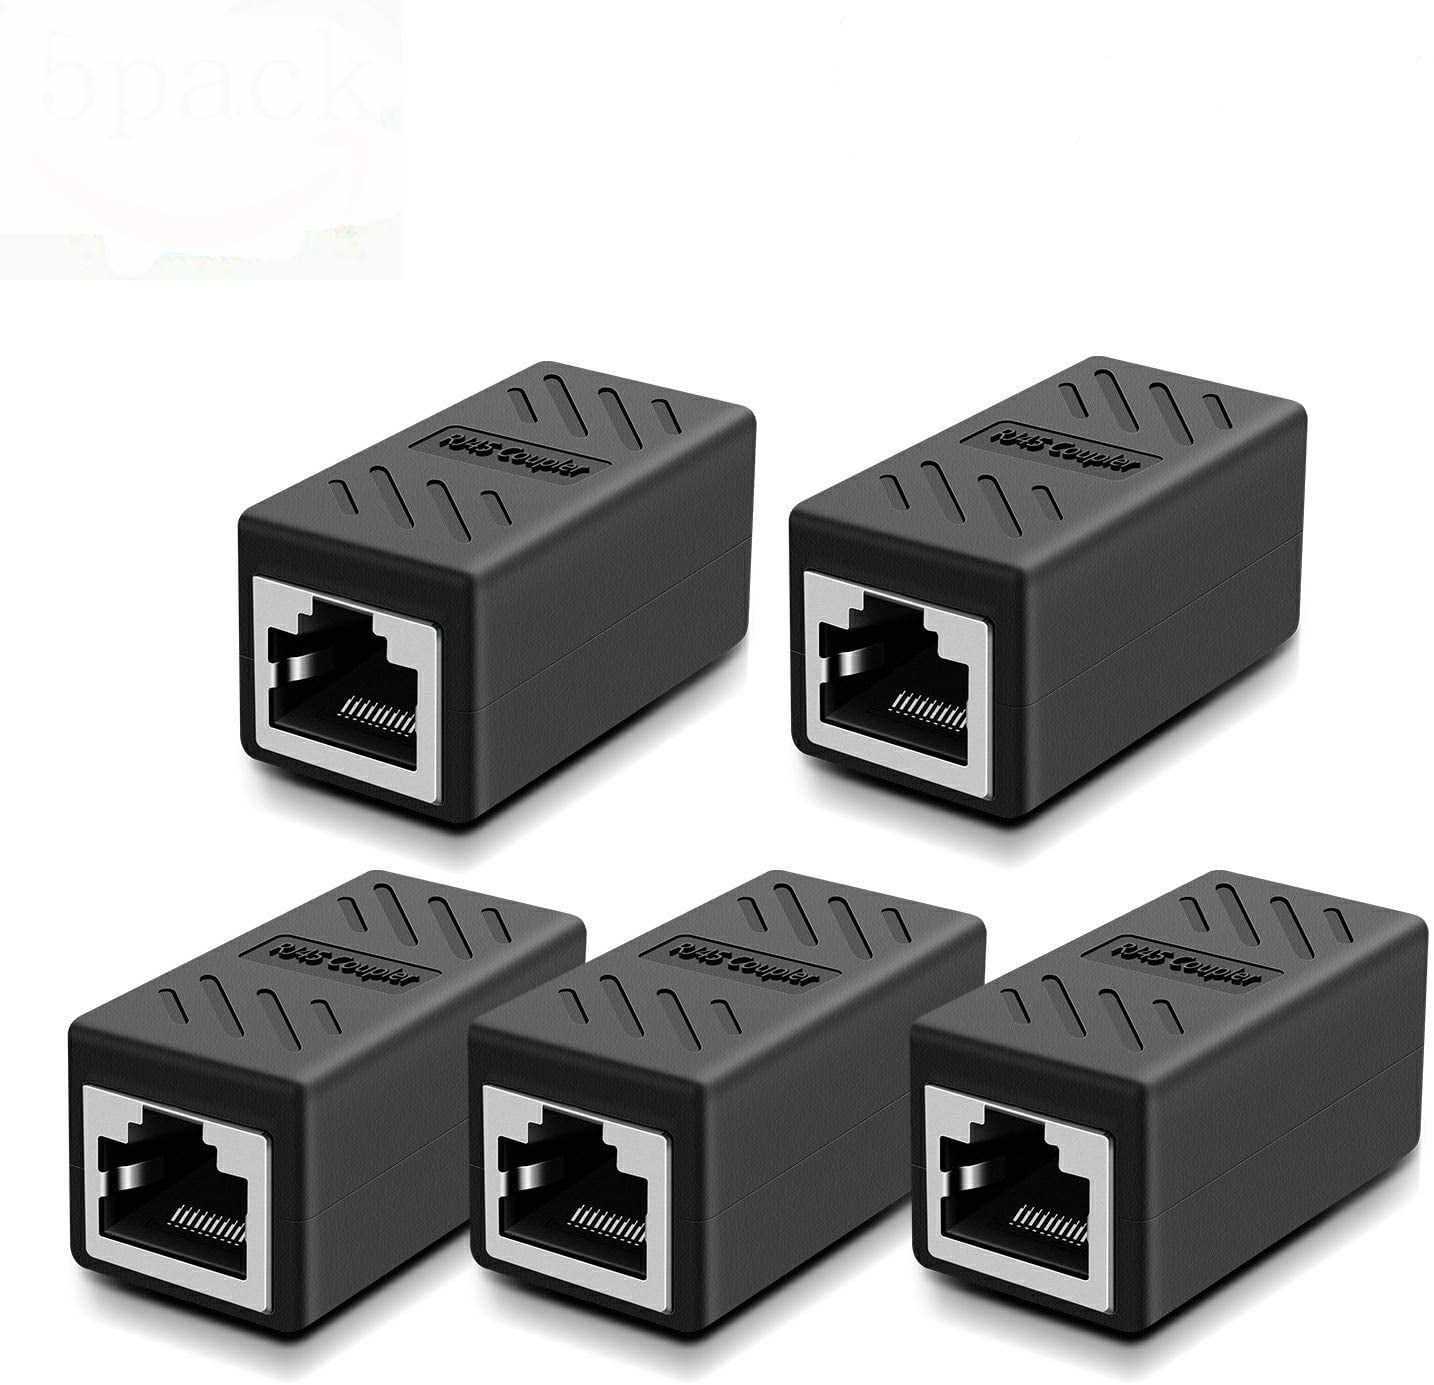 Cat7/Cat6/Cat5e/Cat5 Inline Network Cable Extender Female to Female 5-Pack,Black Ethernet Coupler 